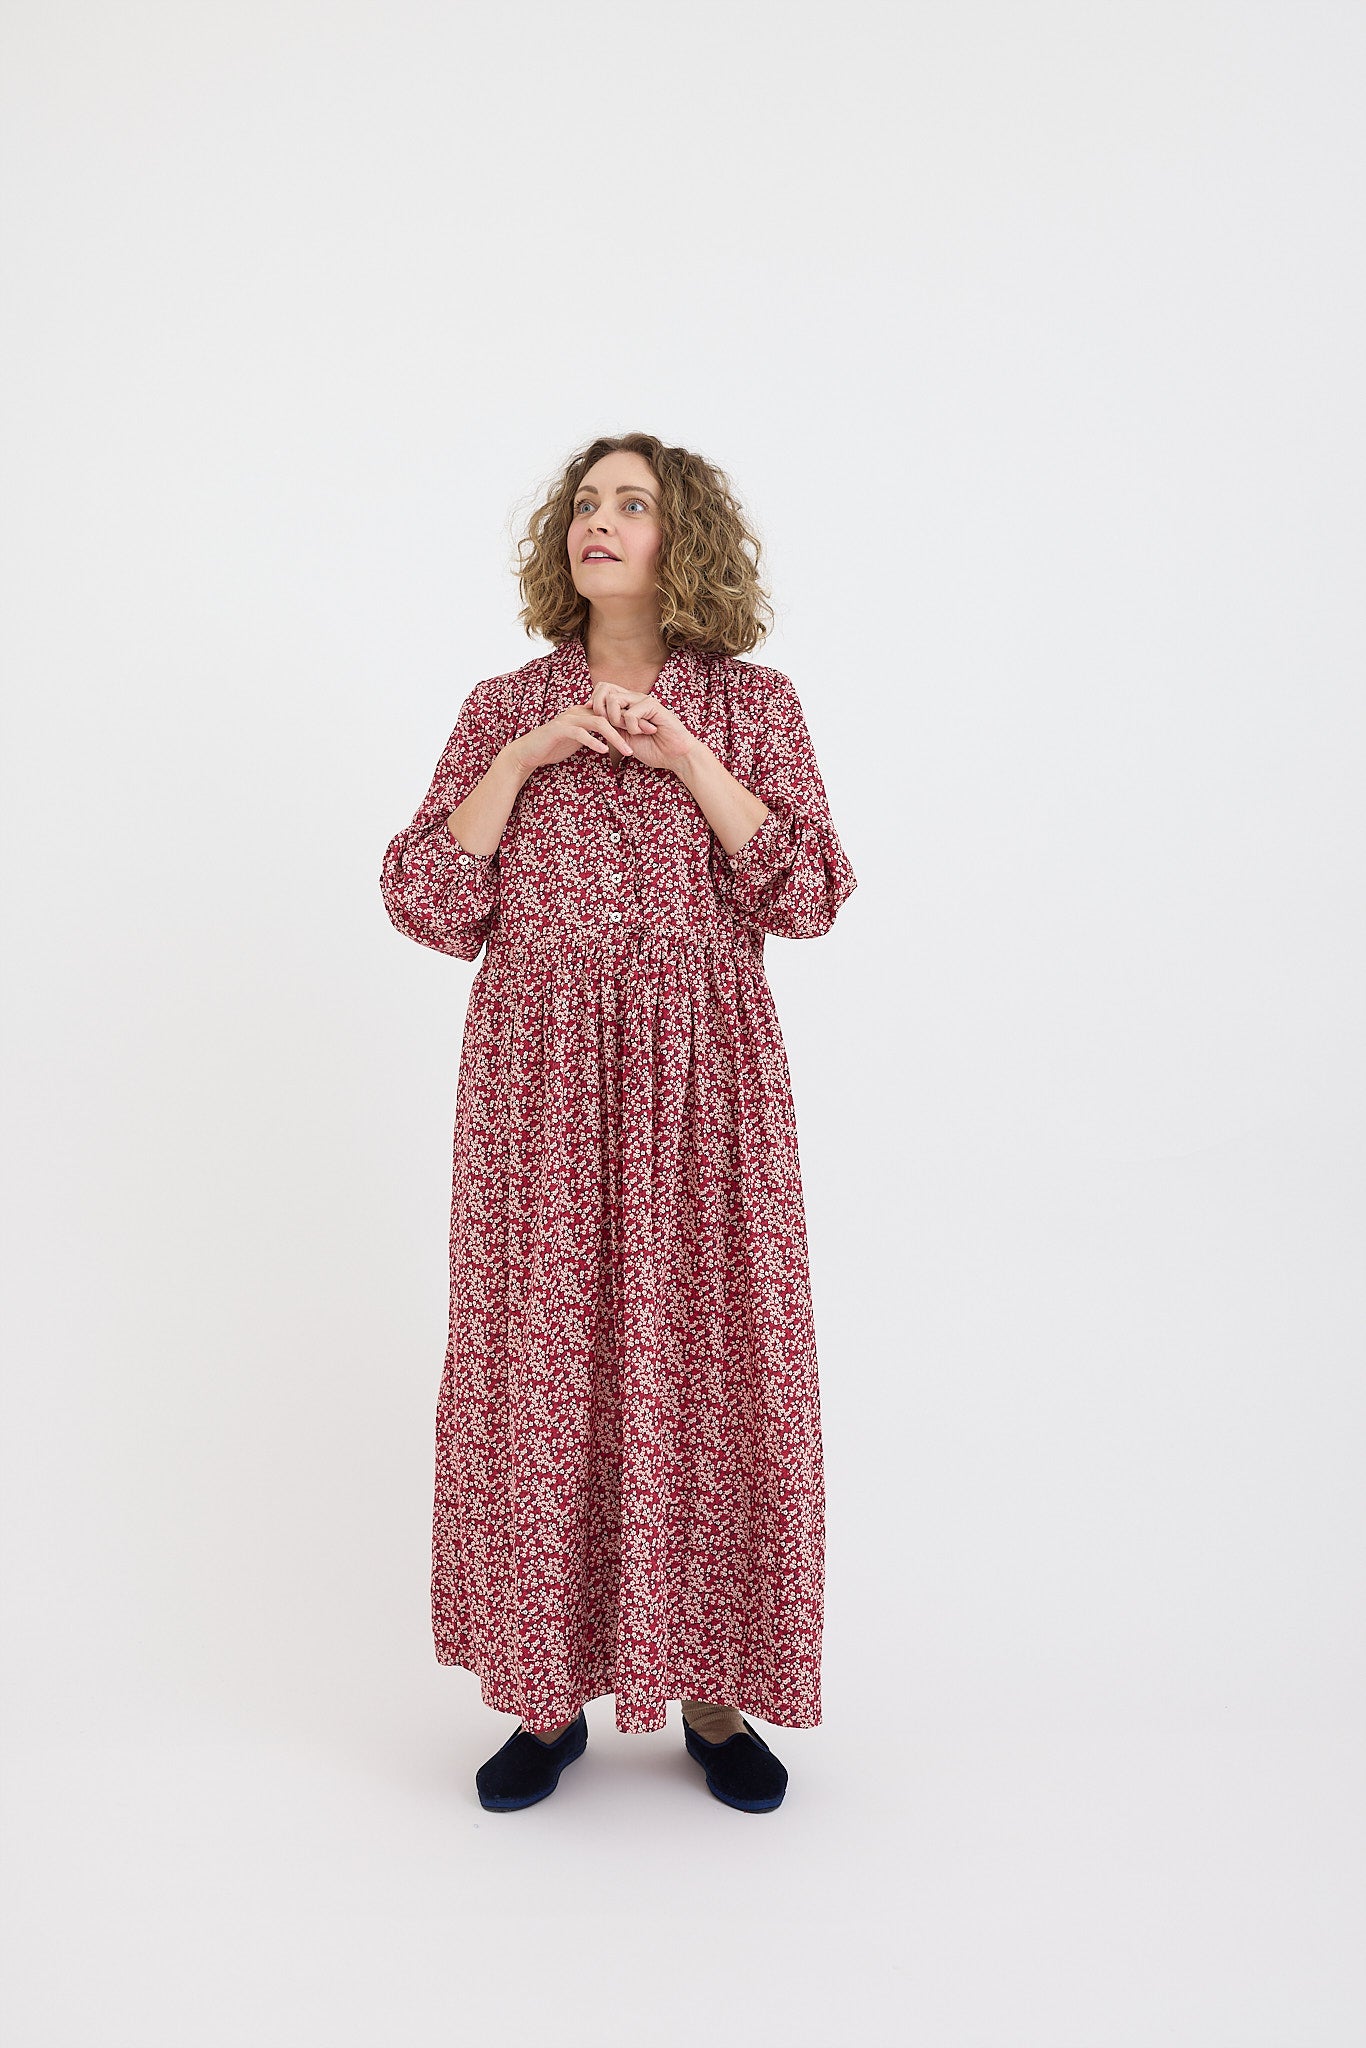 Pearl Dress - Liberty of London Cotton - Melbourne Made